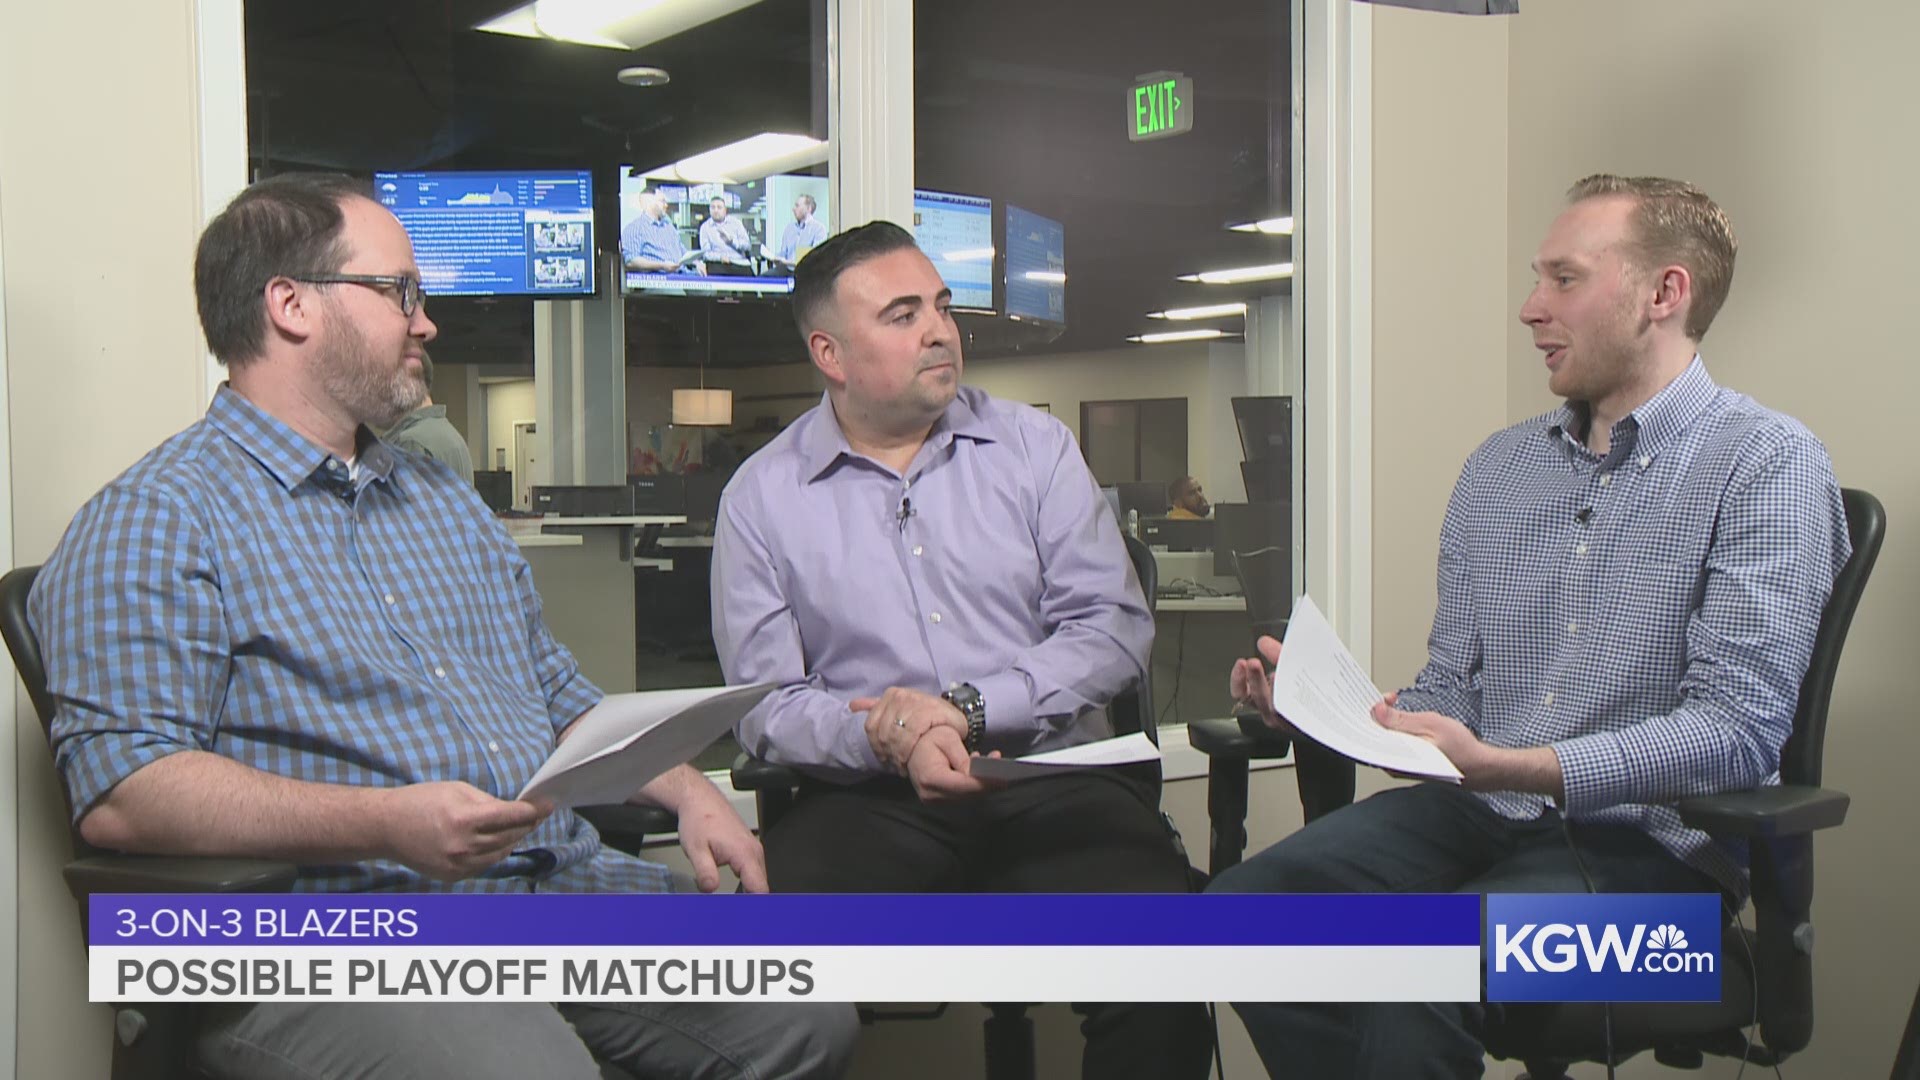 KGW's Jared Cowley, Orlando Sanchez and Nate Hanson predict how the Blazers will fare in their final four games of the 2017-18 regular season.